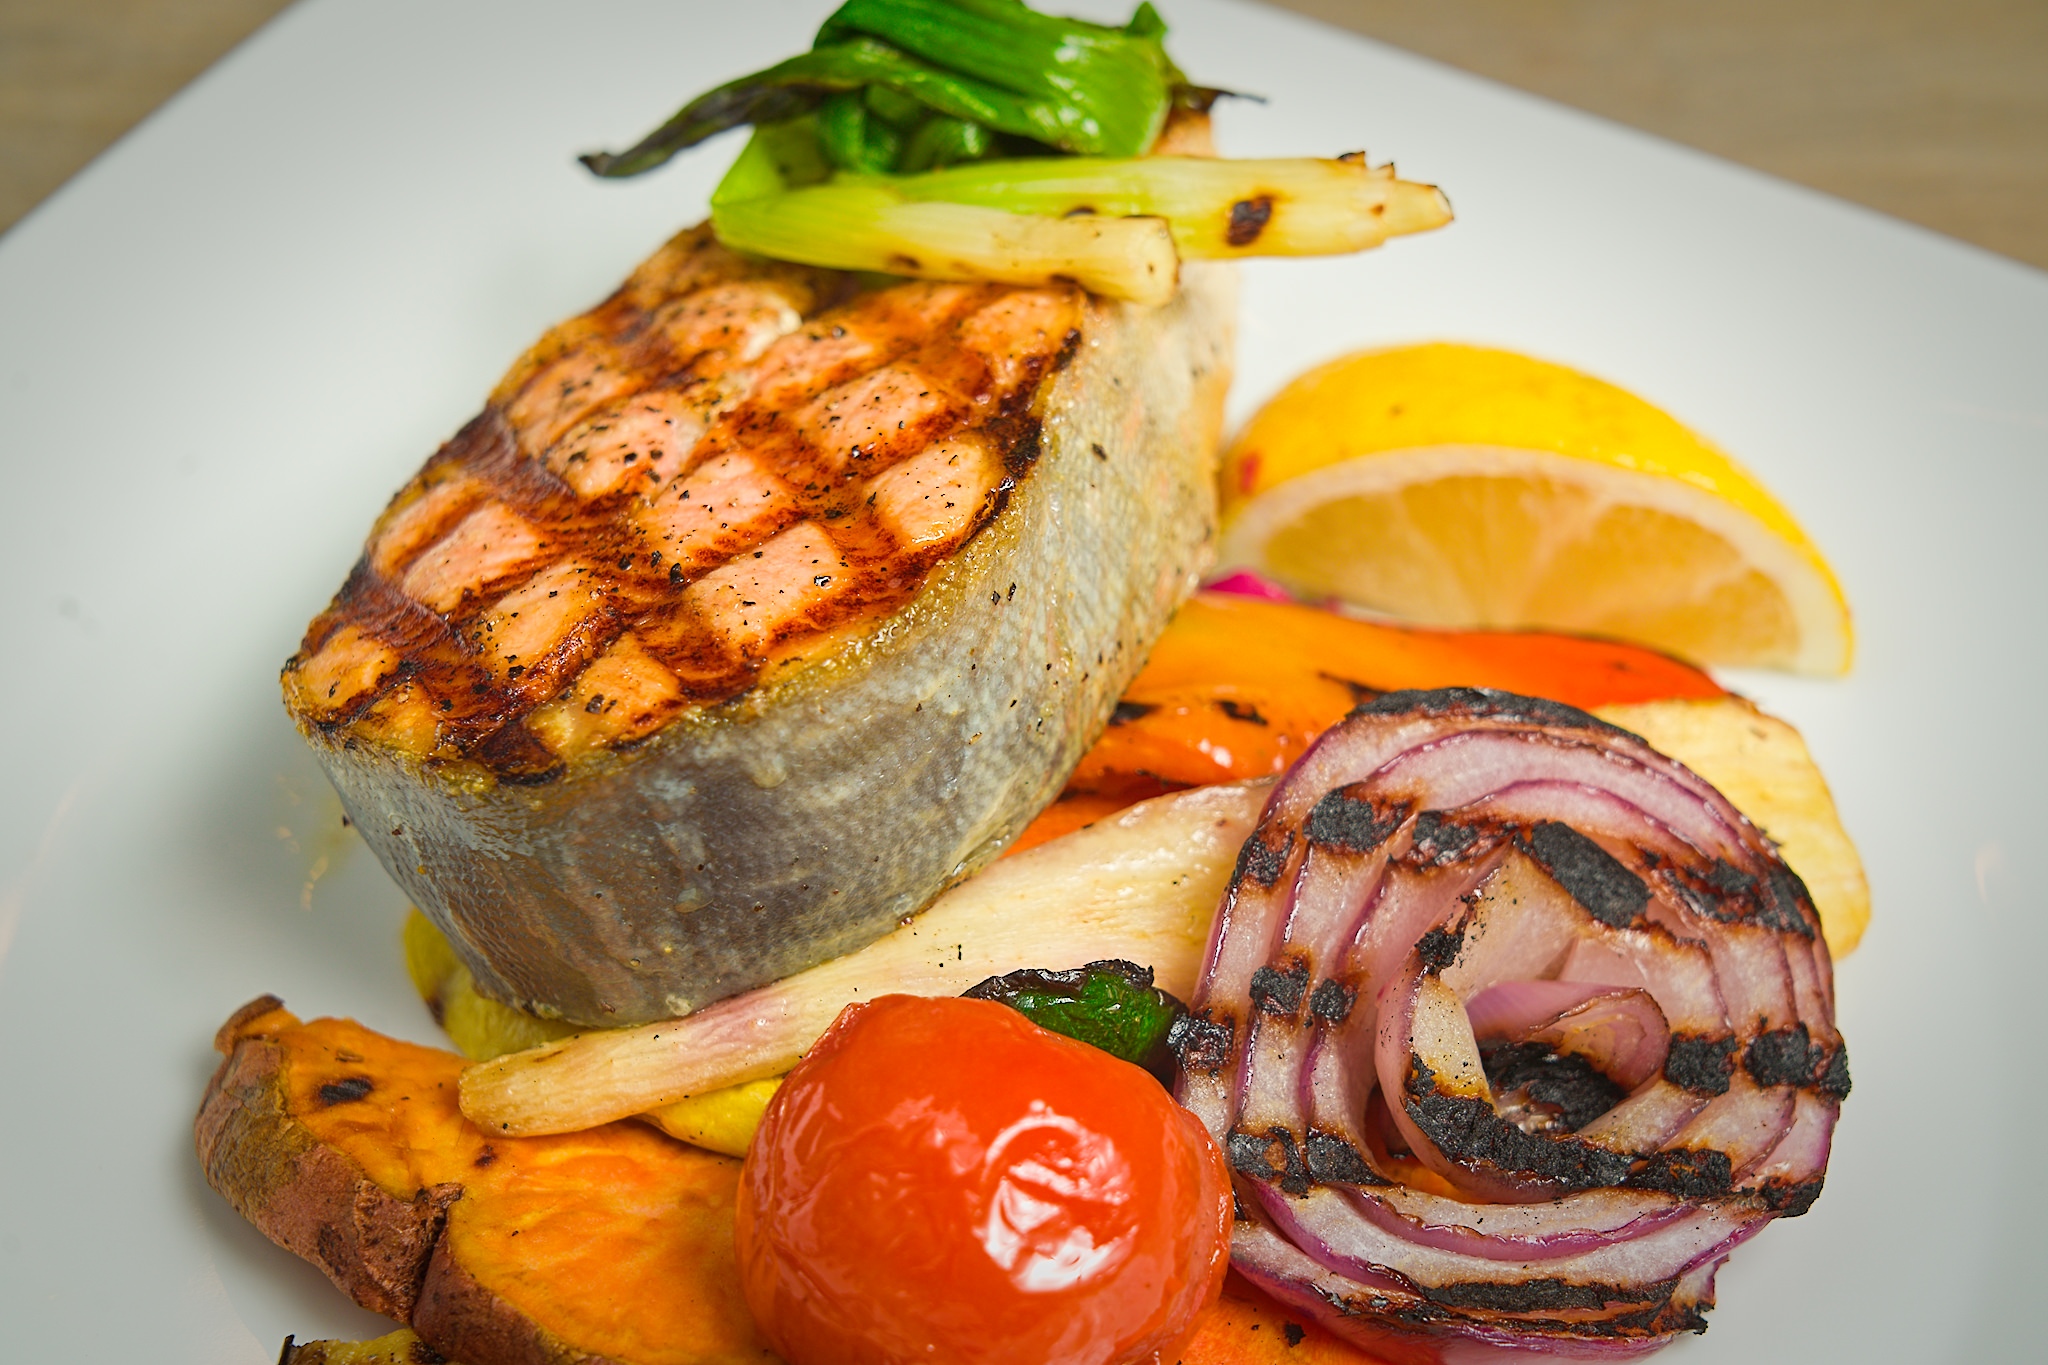 Grilled arctic char with a side of roasted vegetables